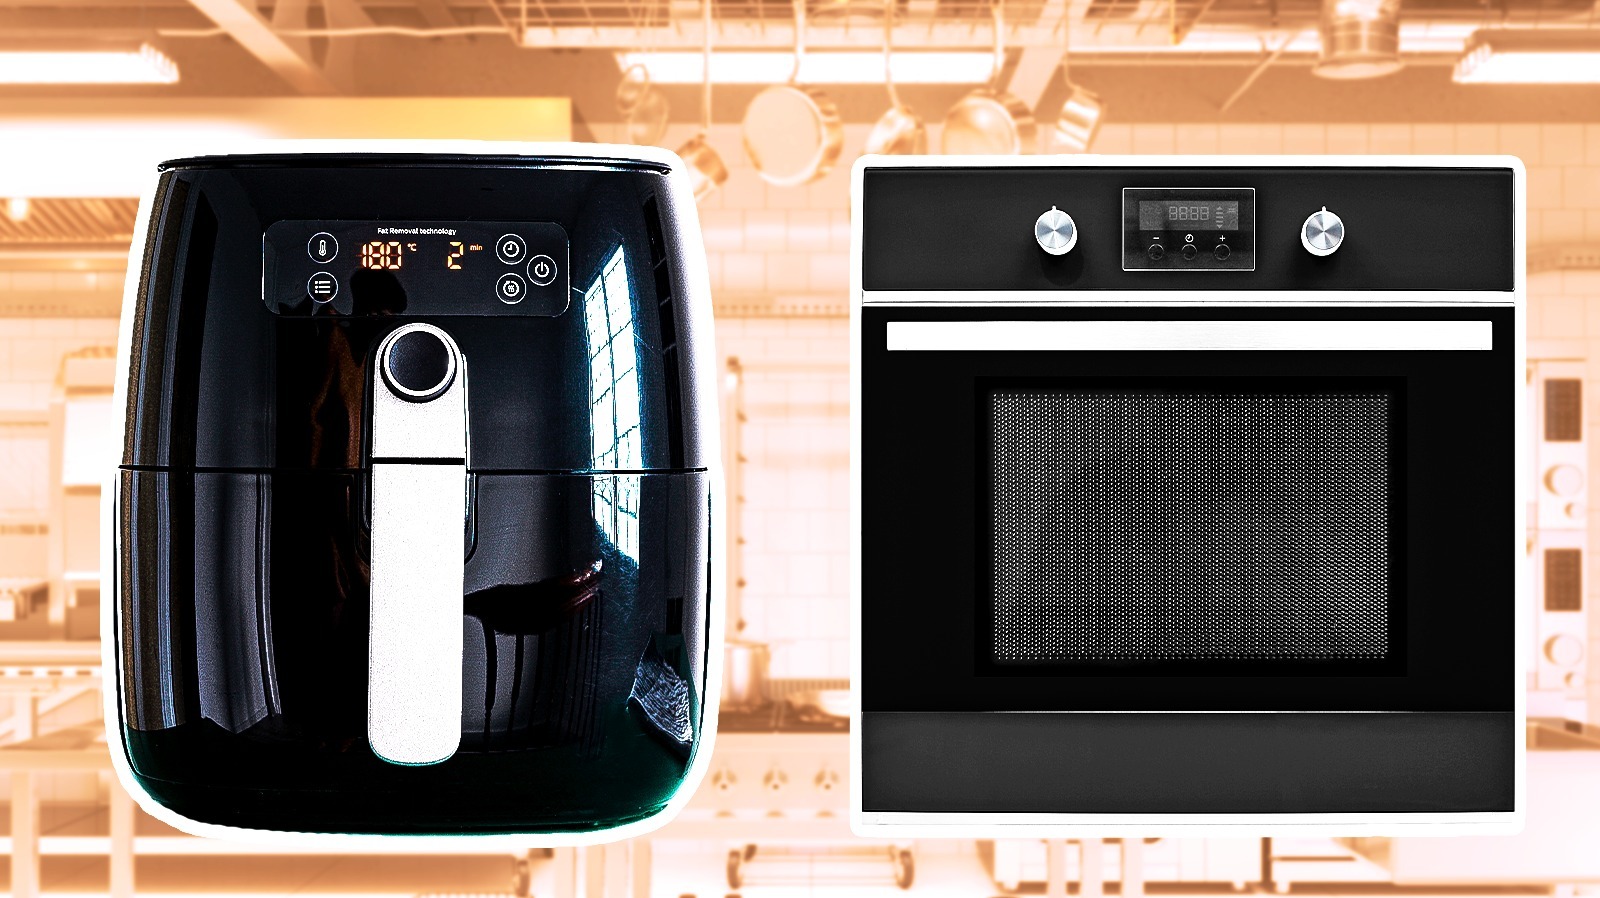 Professional Chefs Need To Chill With The Air Fryer Hate – The Daily Meal